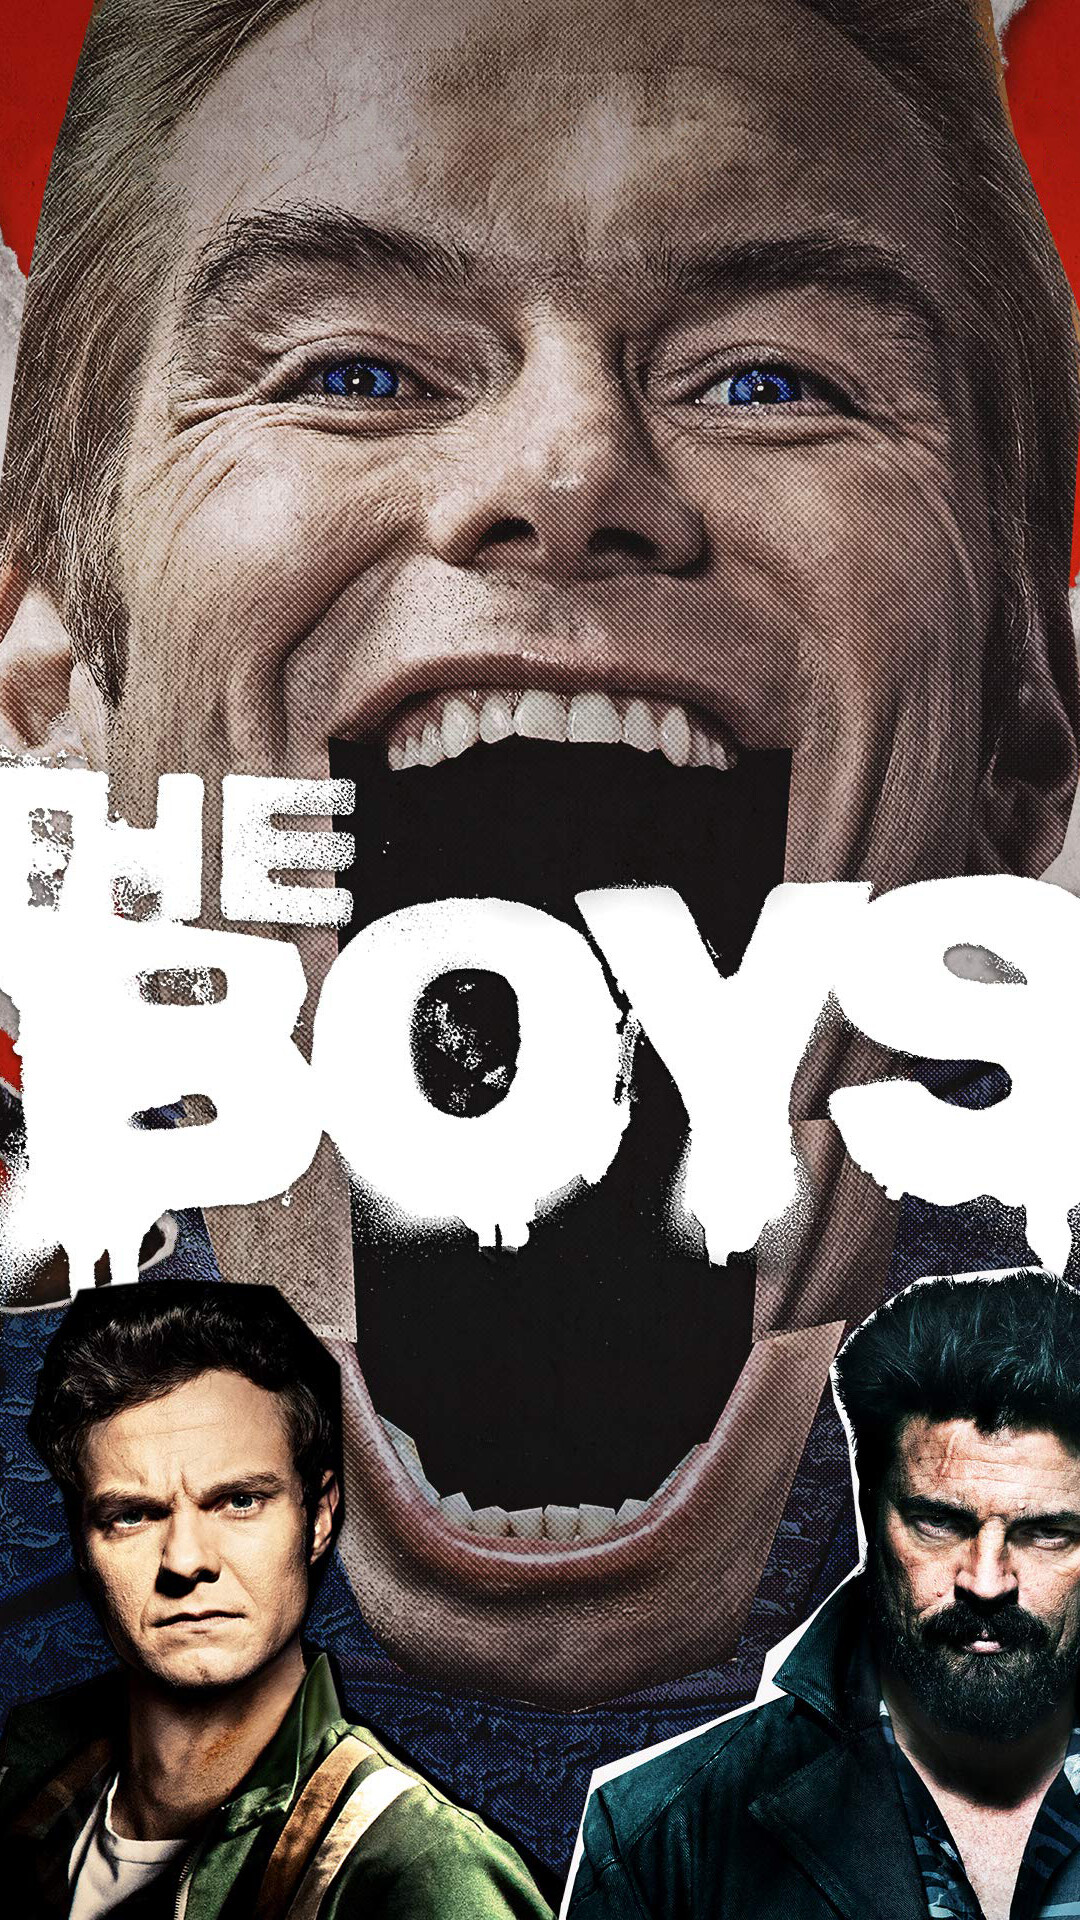 The Boys: A dark parody focused on corrupt superheroes and a misfit team working to expose them. 1080x1920 Full HD Background.